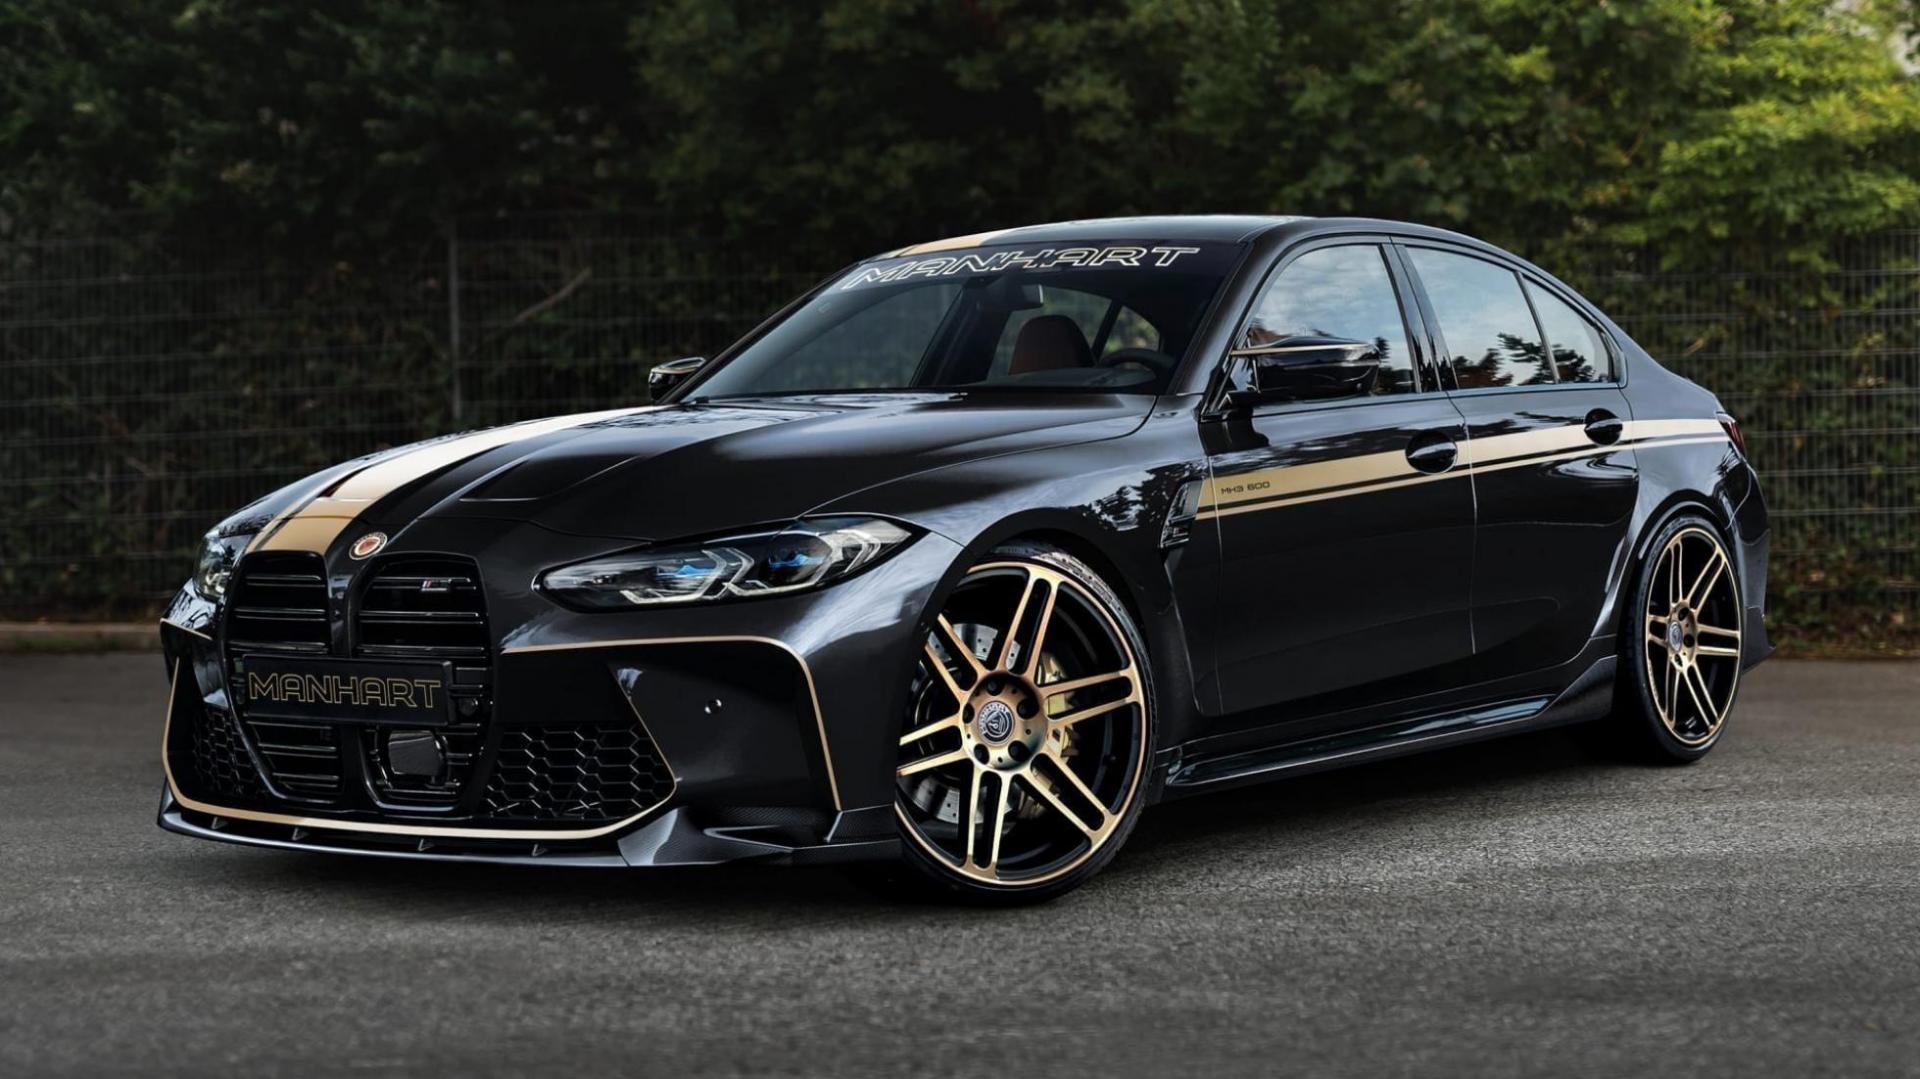 Manhart’s modified M3 and M4 look absolutely wild | Modified Rides